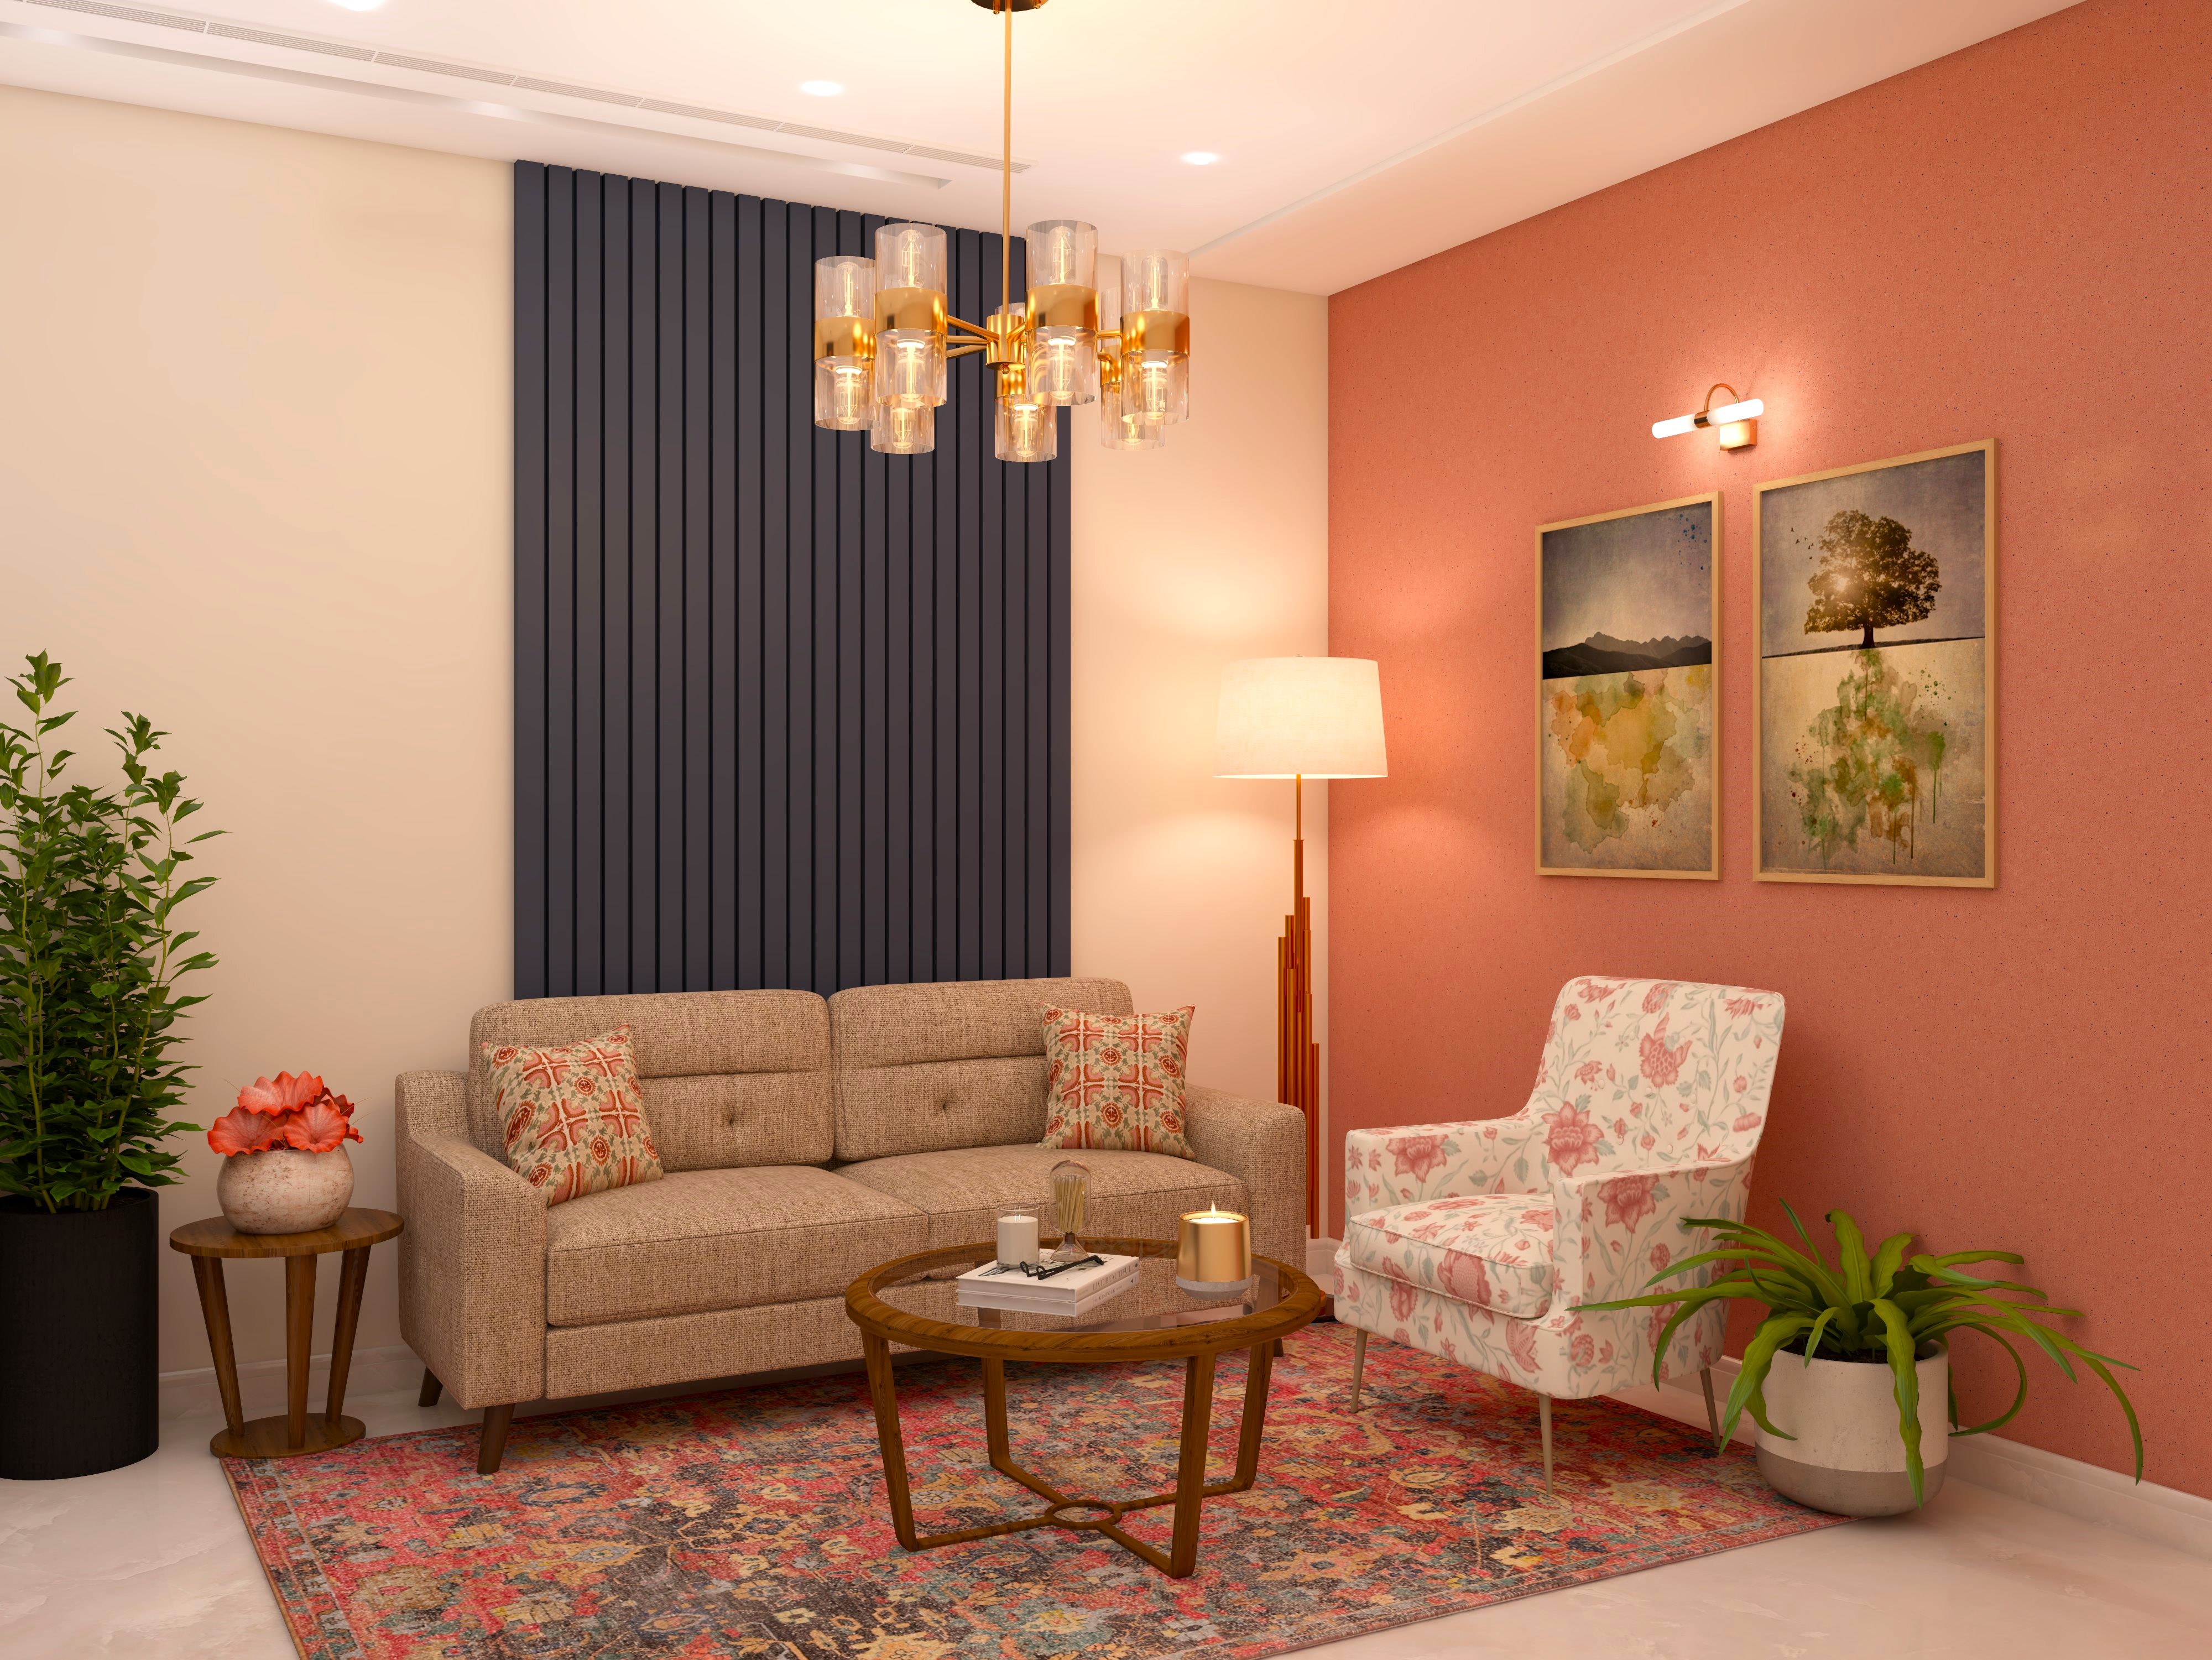 Living room with orange wall and armchair with floral upholstery-Beautiful Homes